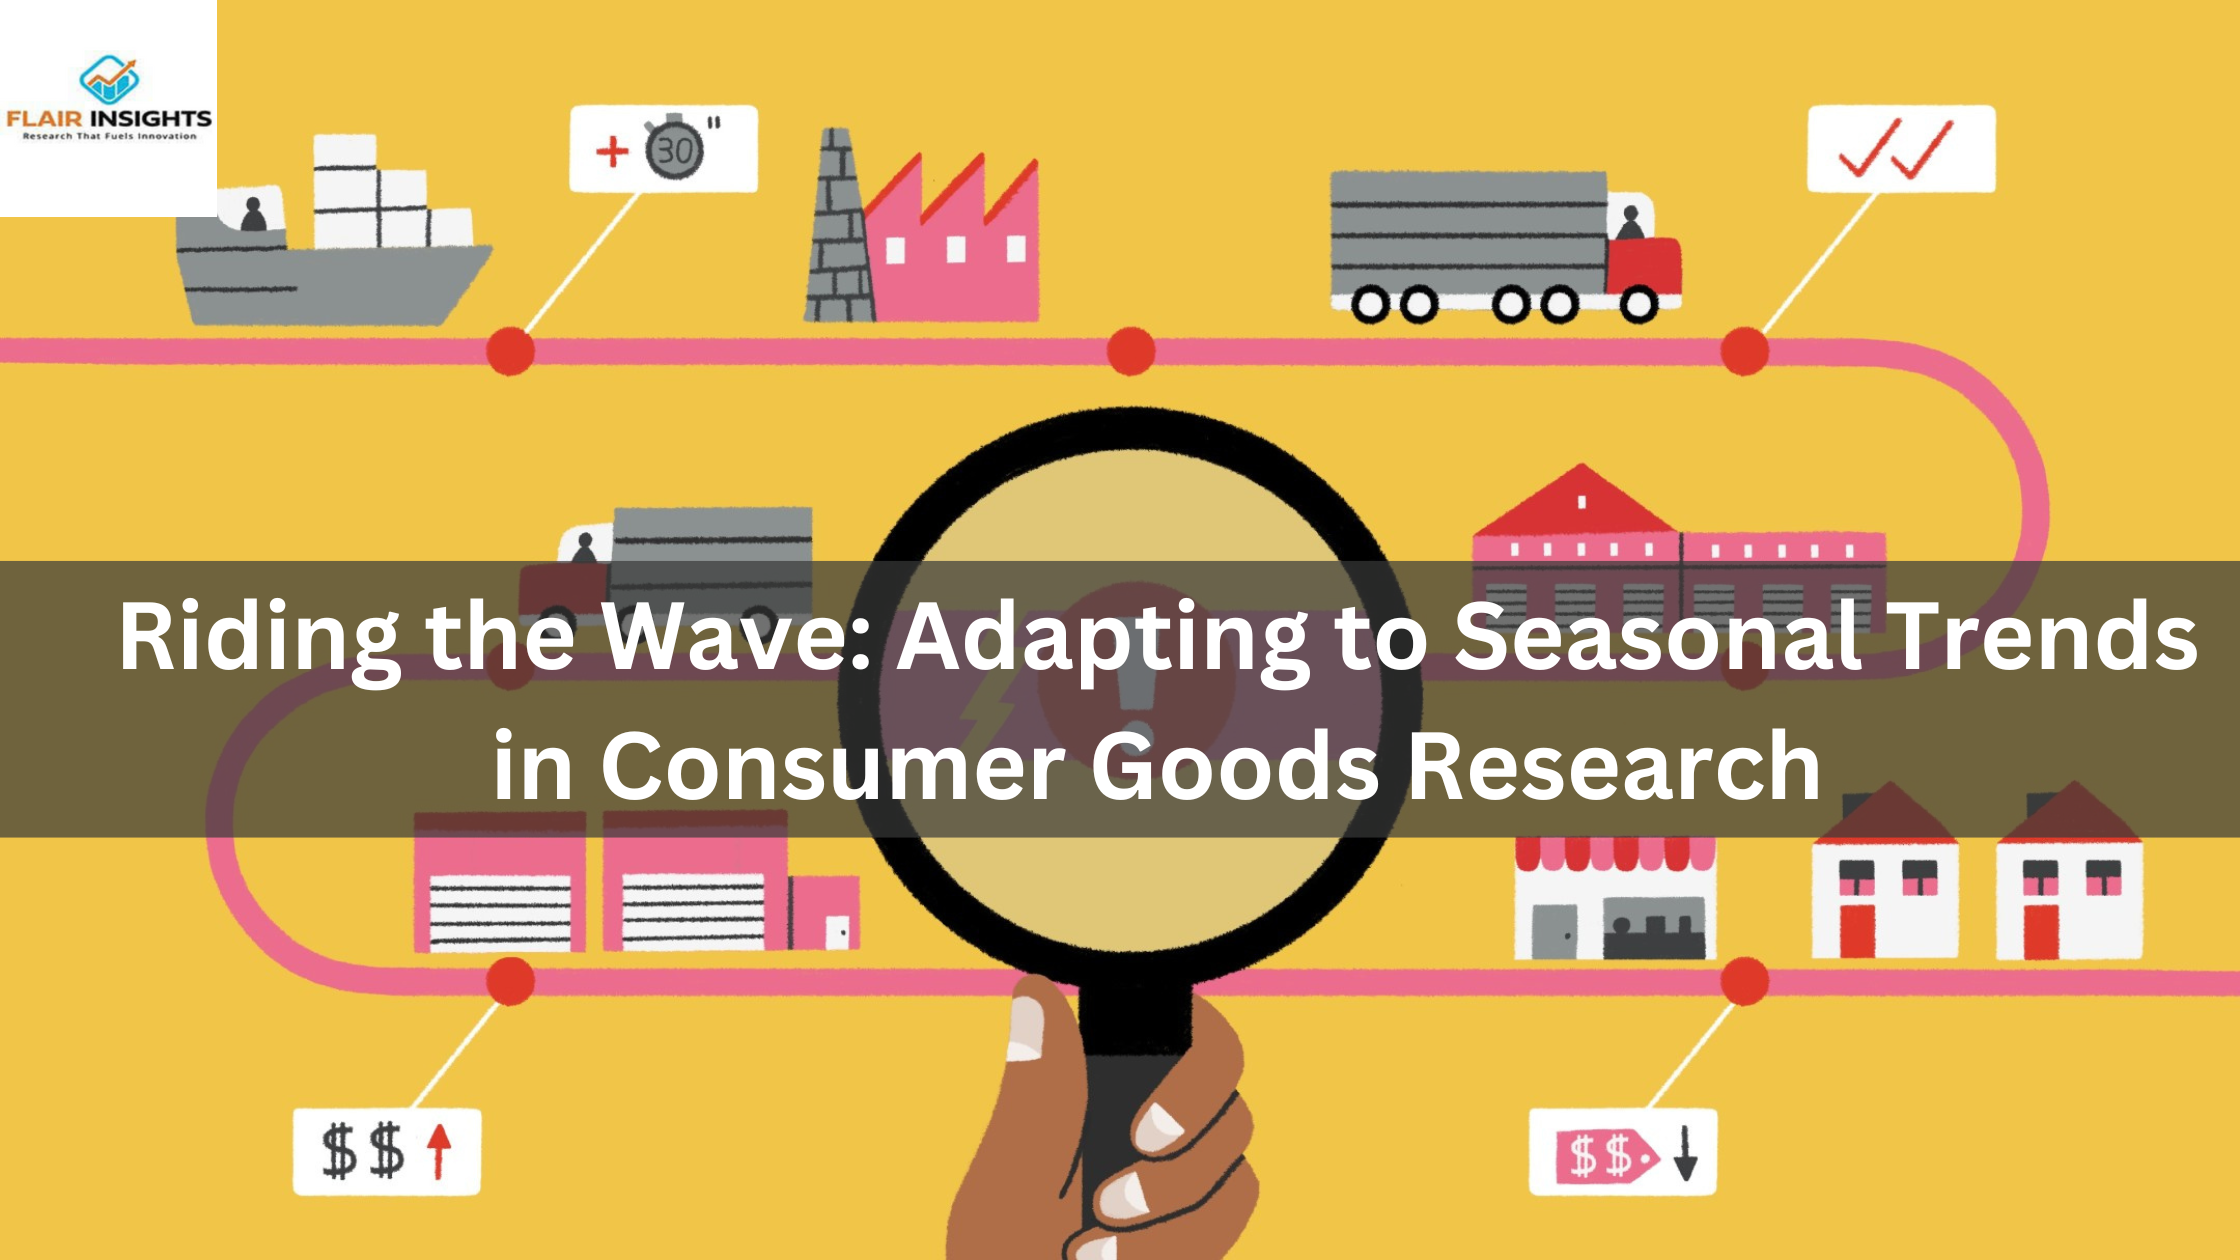 Riding the Wave: Adapting to Seasonal Trends in Consumer Goods Research